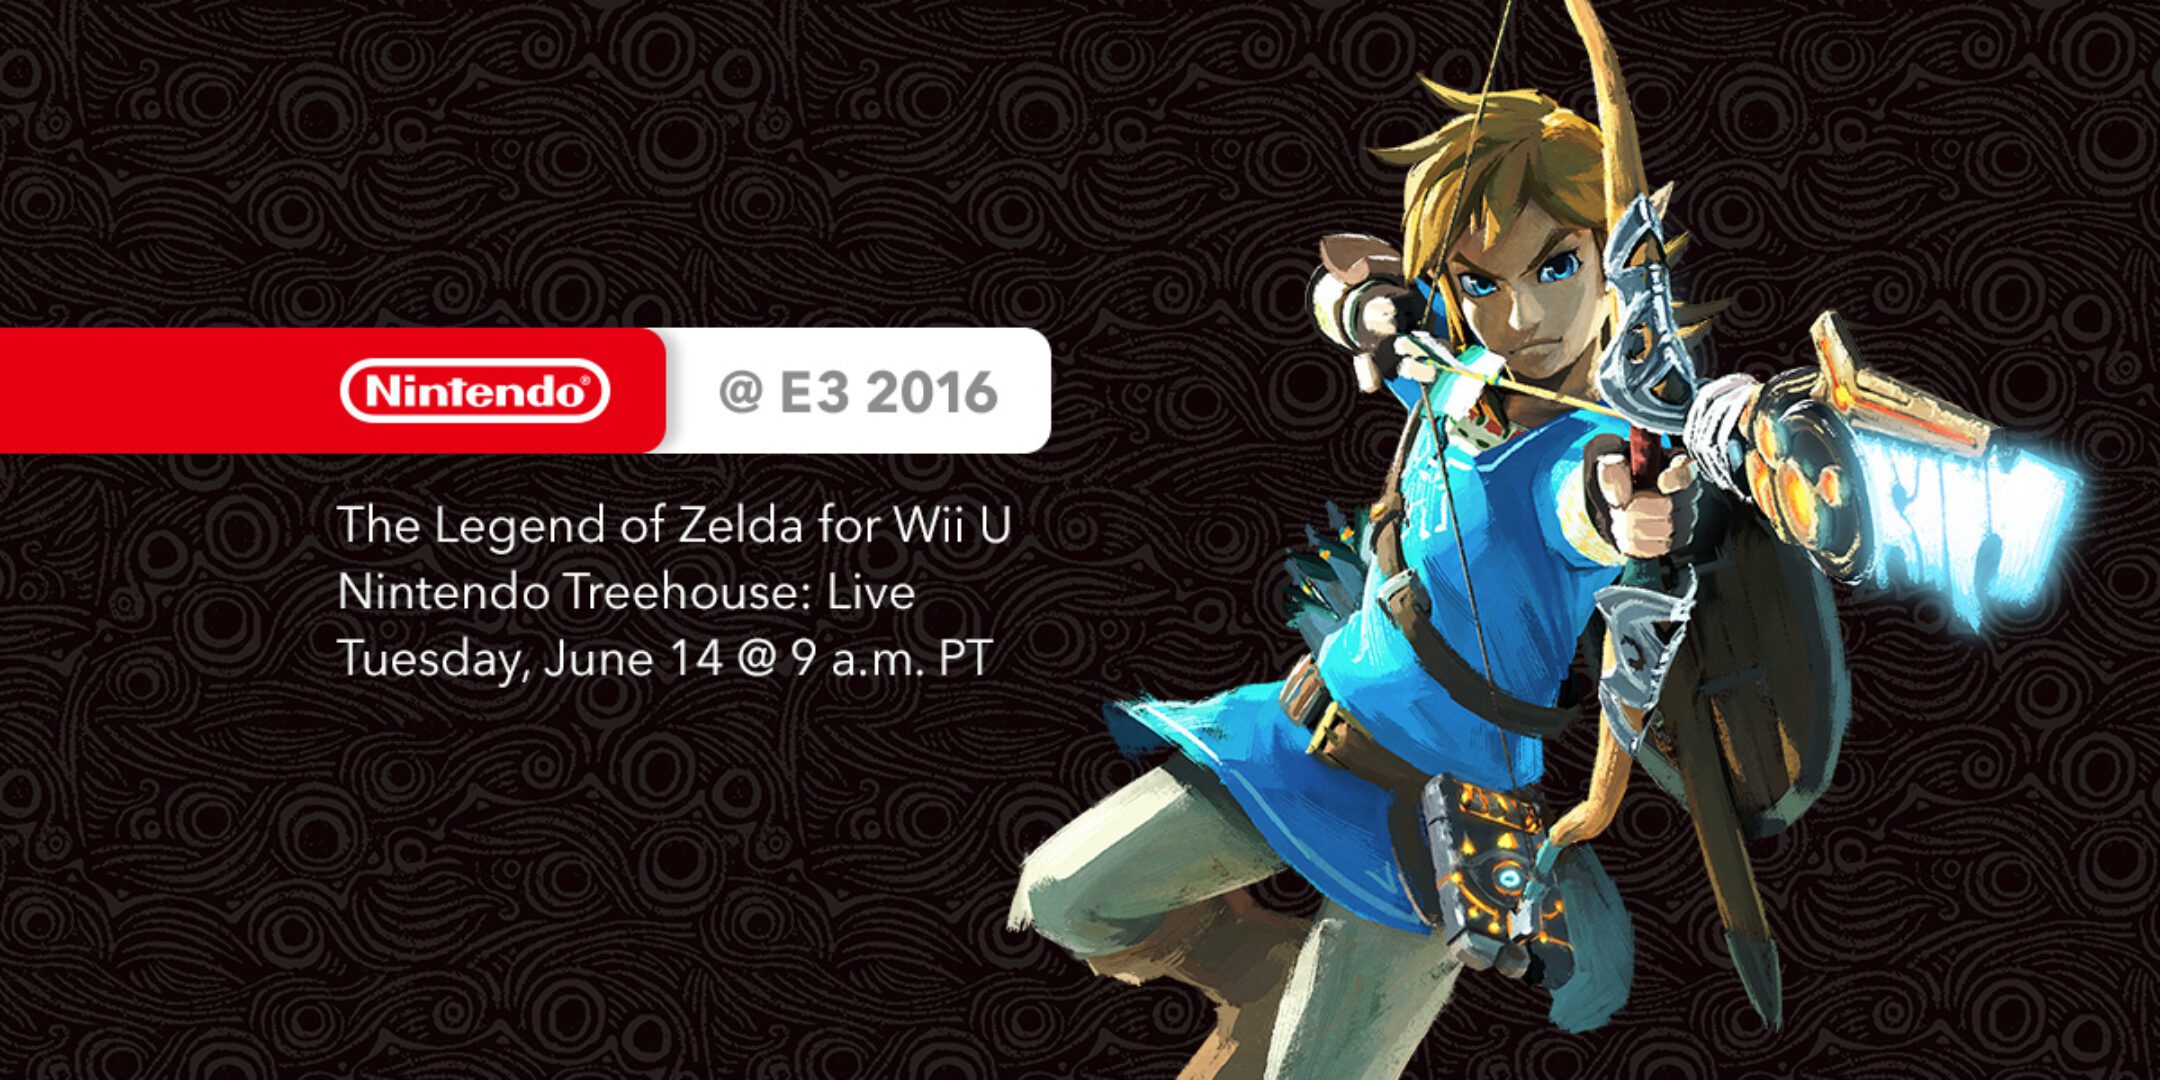 Nintendo Offering Tons of Zelda Coverage This E3